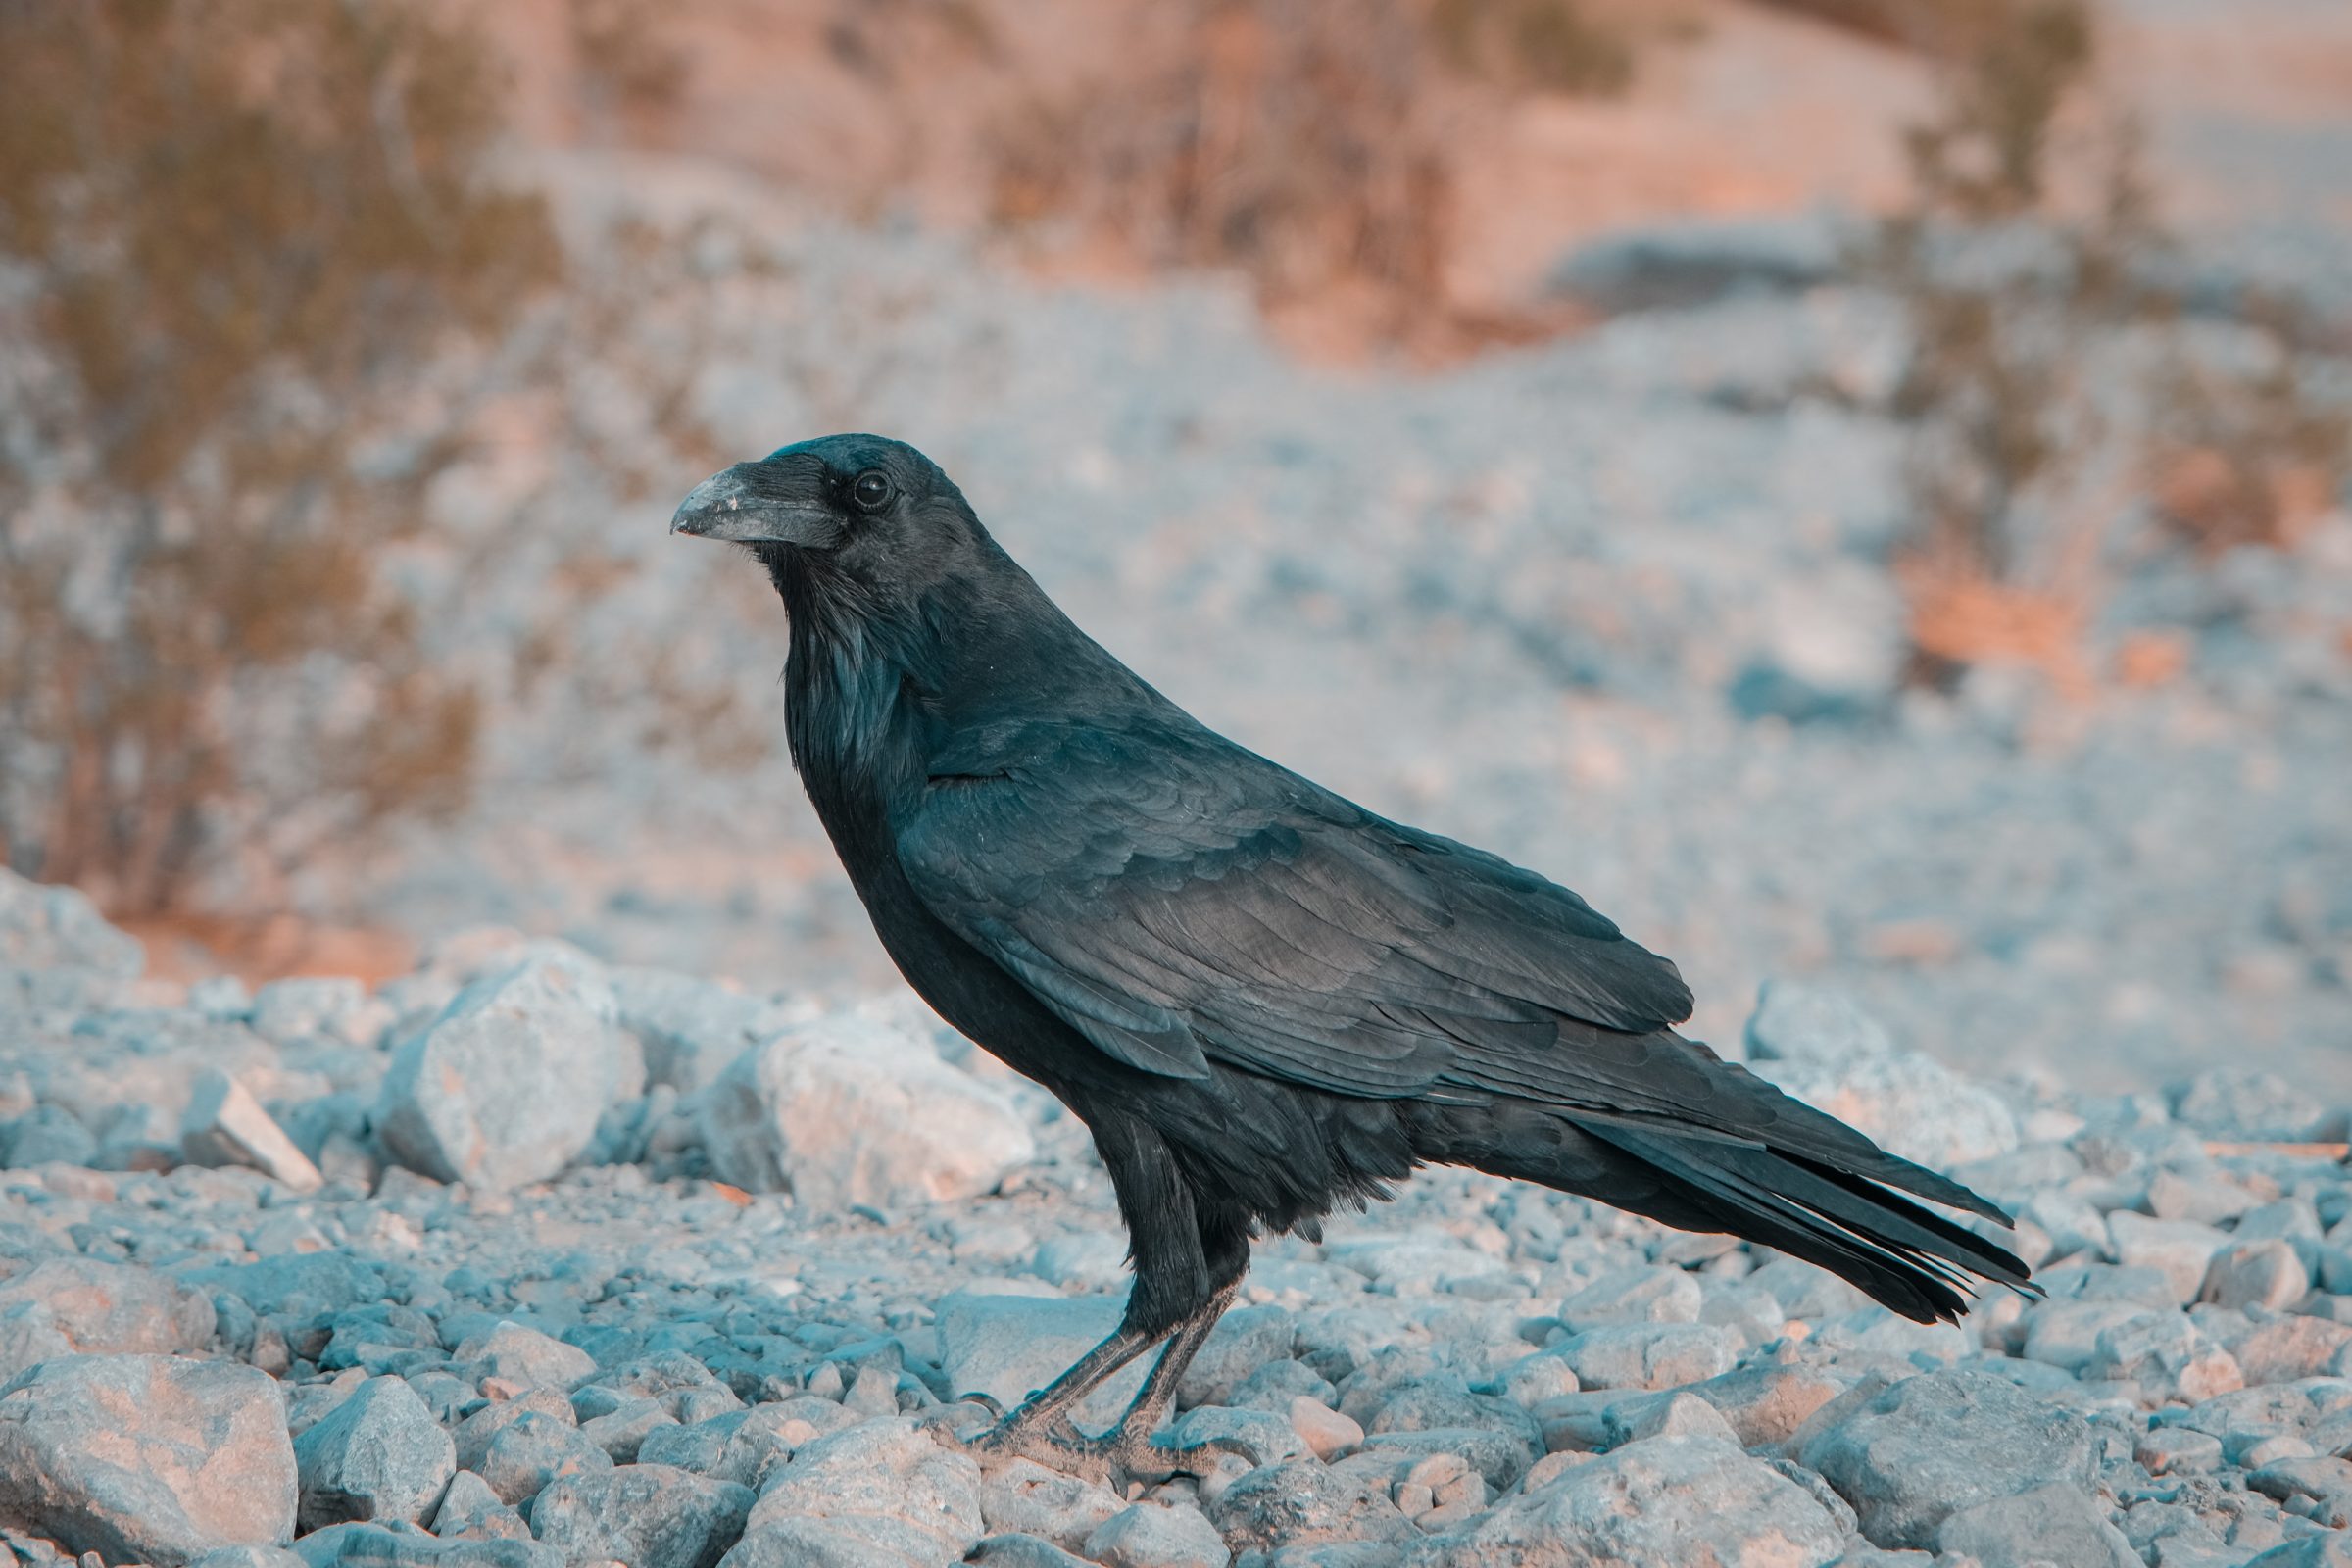 A black raven in Death Valley